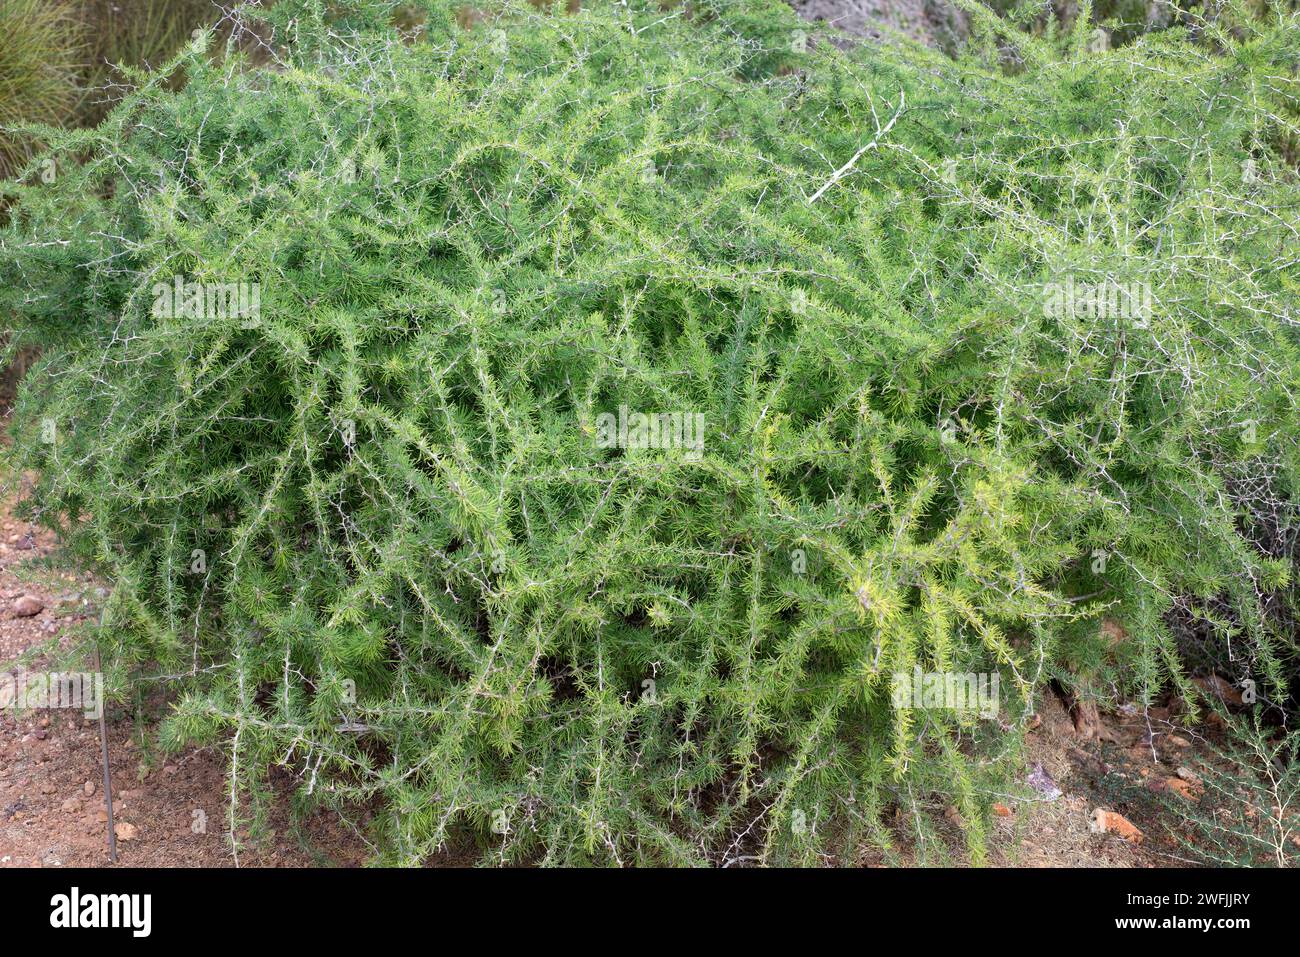 Esparraguera amarguera or esparraguera blanca (Asparagus albus) is a shrub native to western Mediterranean Basin and Canary Islands. THis photo was ta Stock Photo